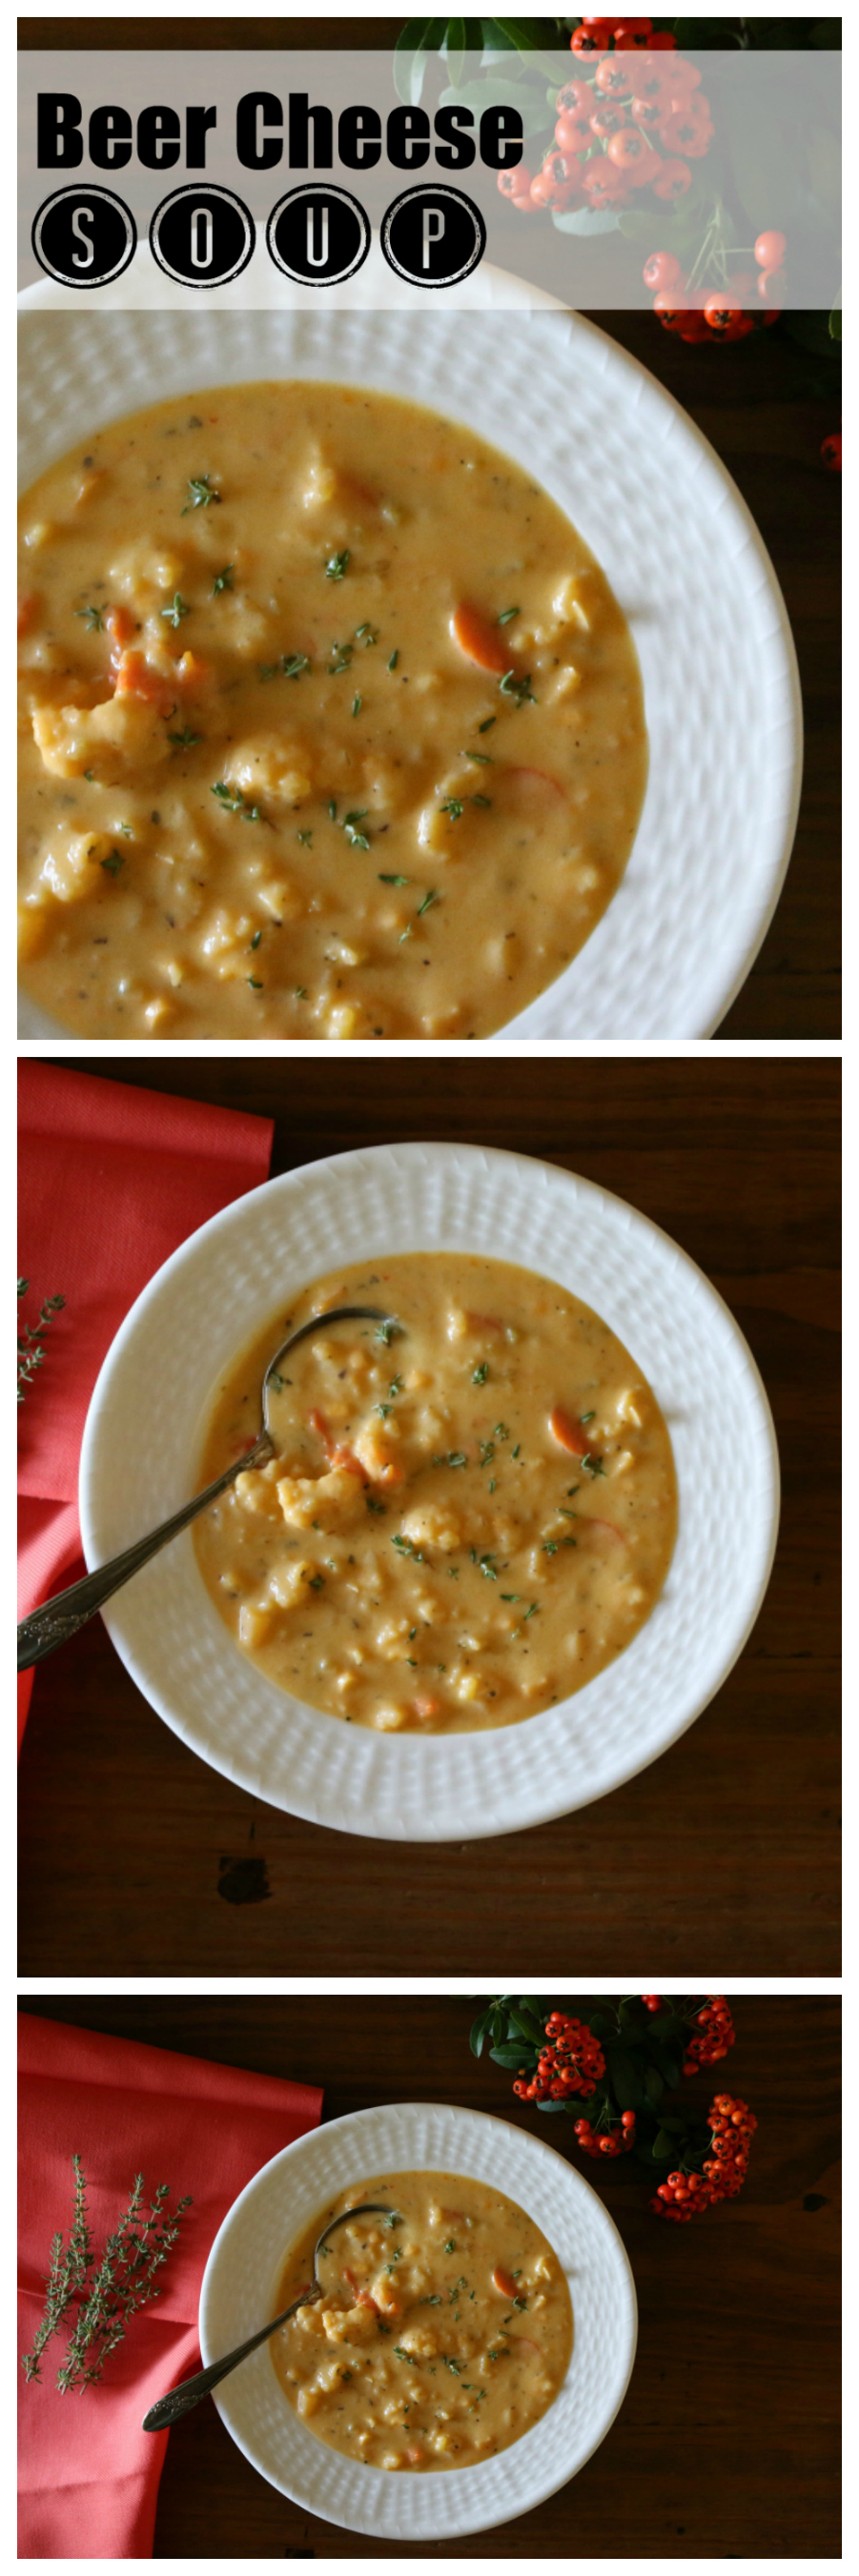 Beer Cheese Soup with Chunky vegetables like cauliflower and carrots. CeceliasGoodStuff.com | Good Food for Good People